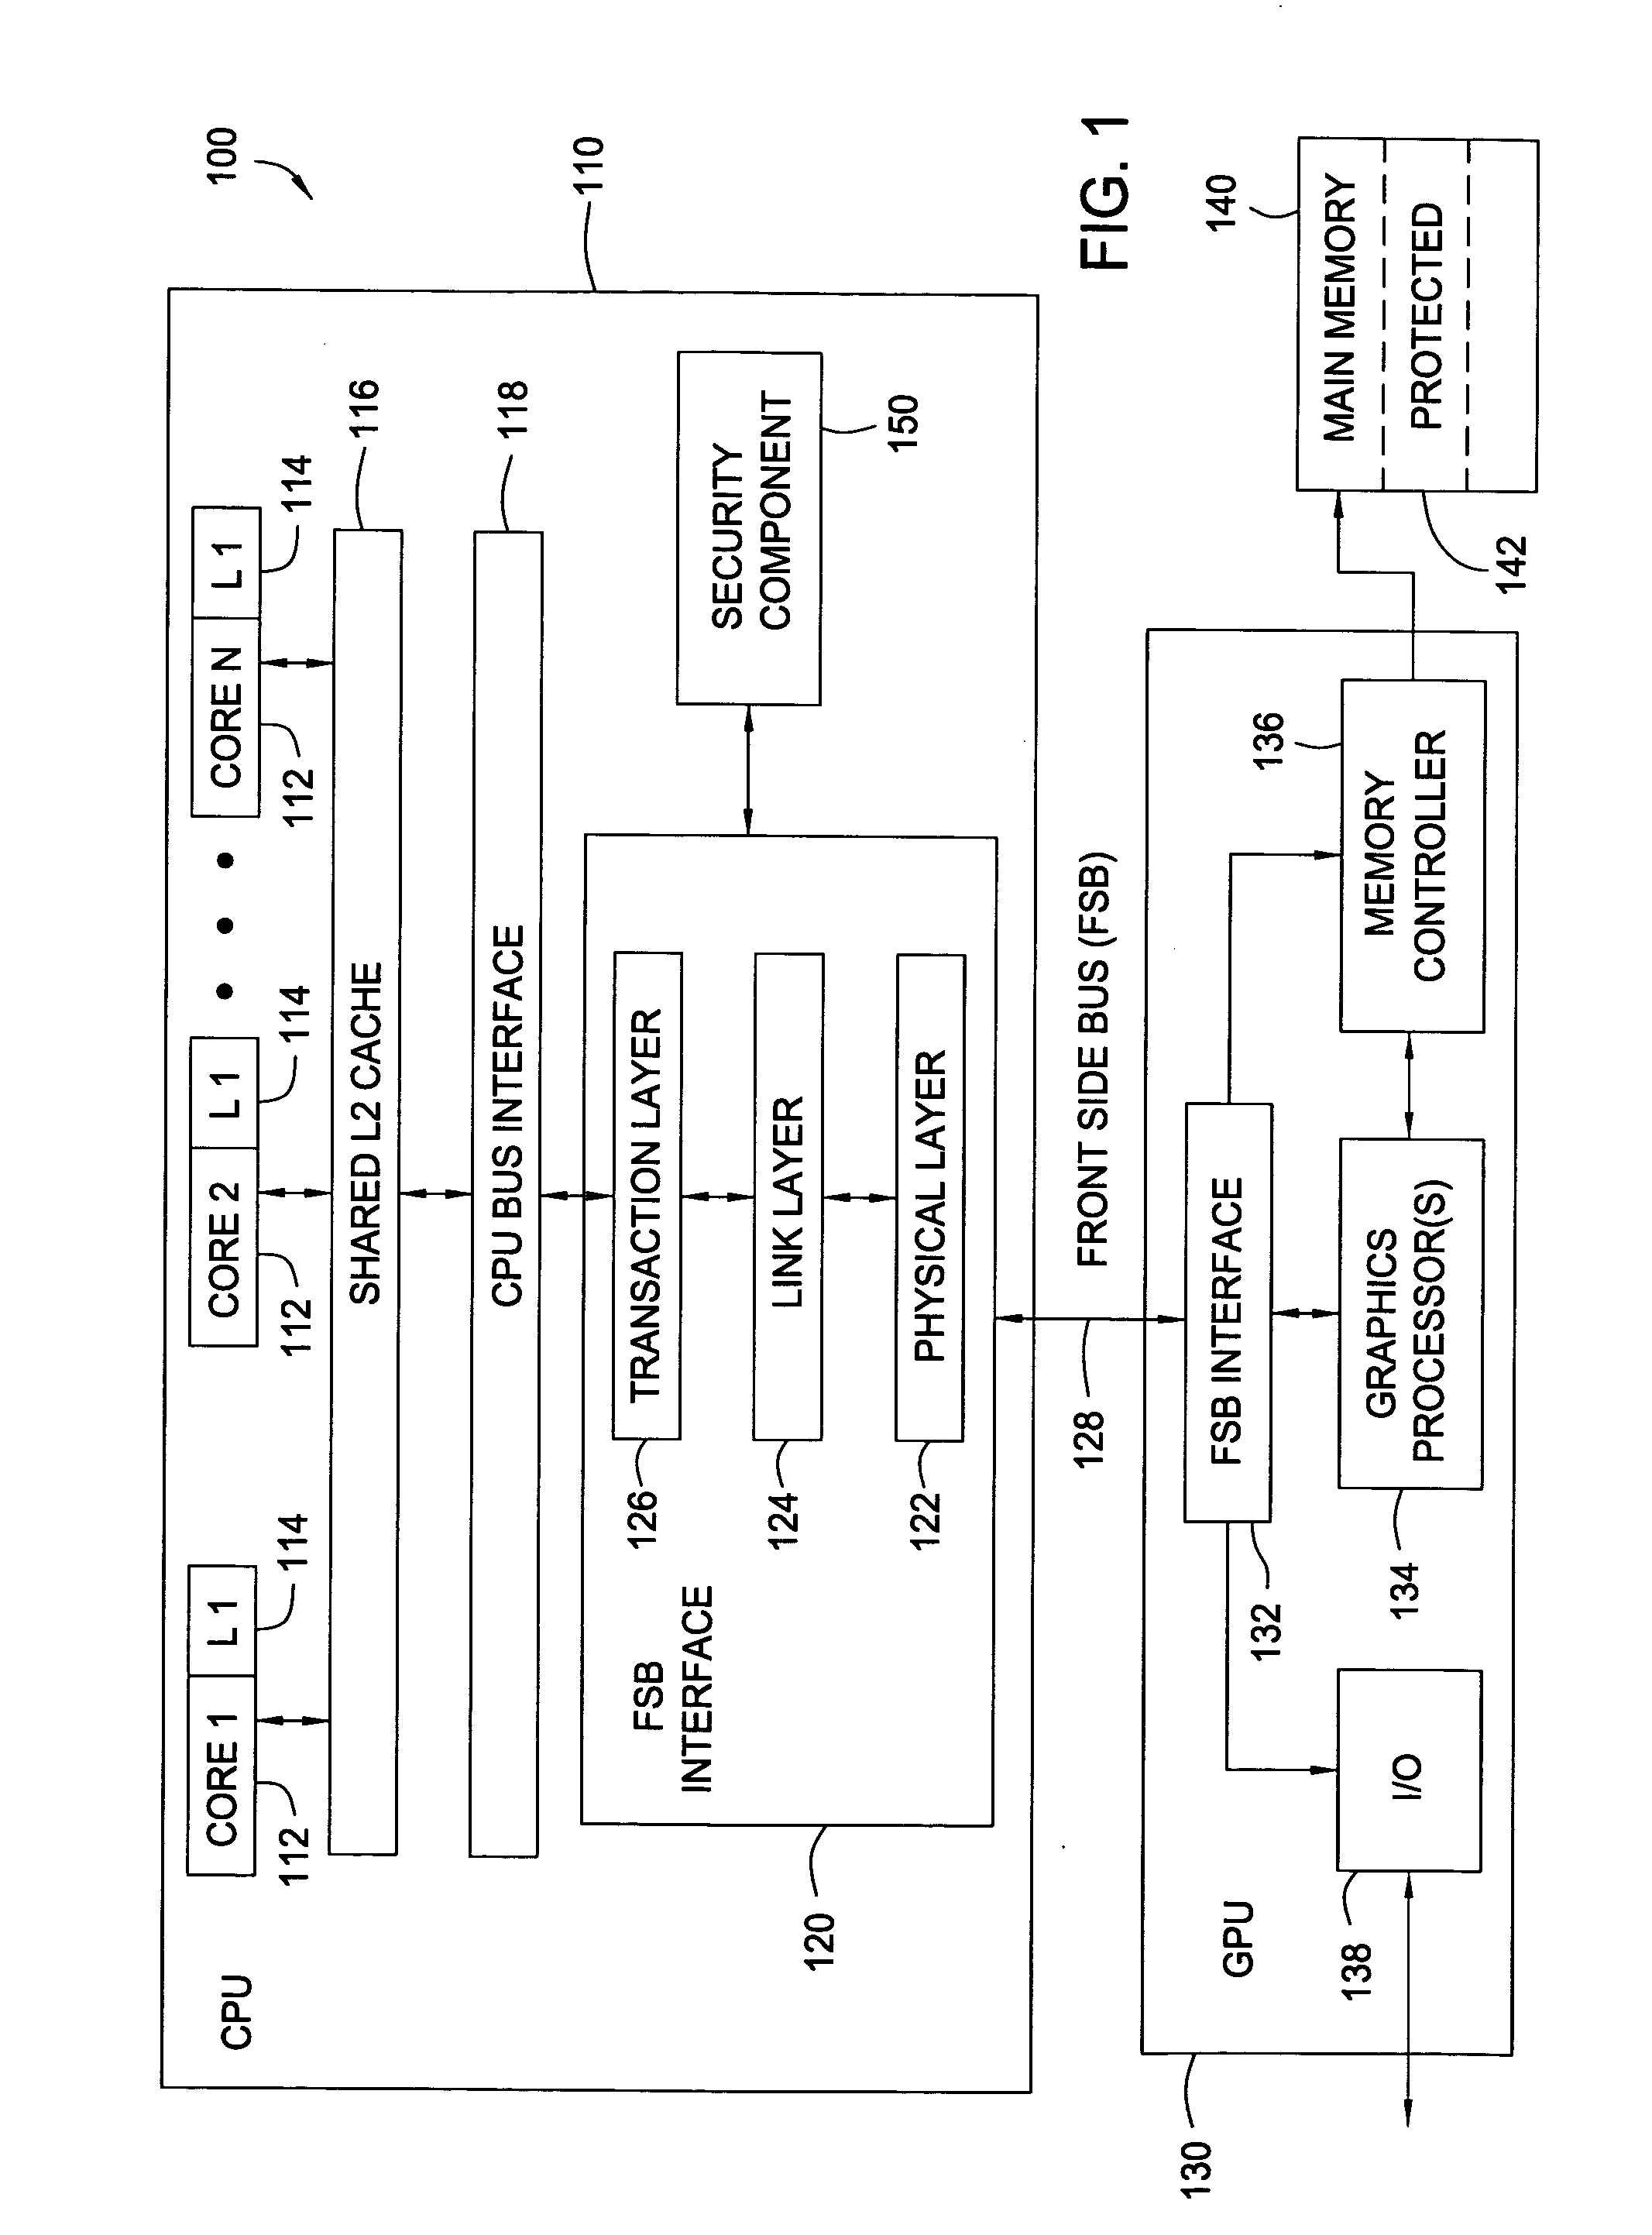 Low-latency data decryption interface